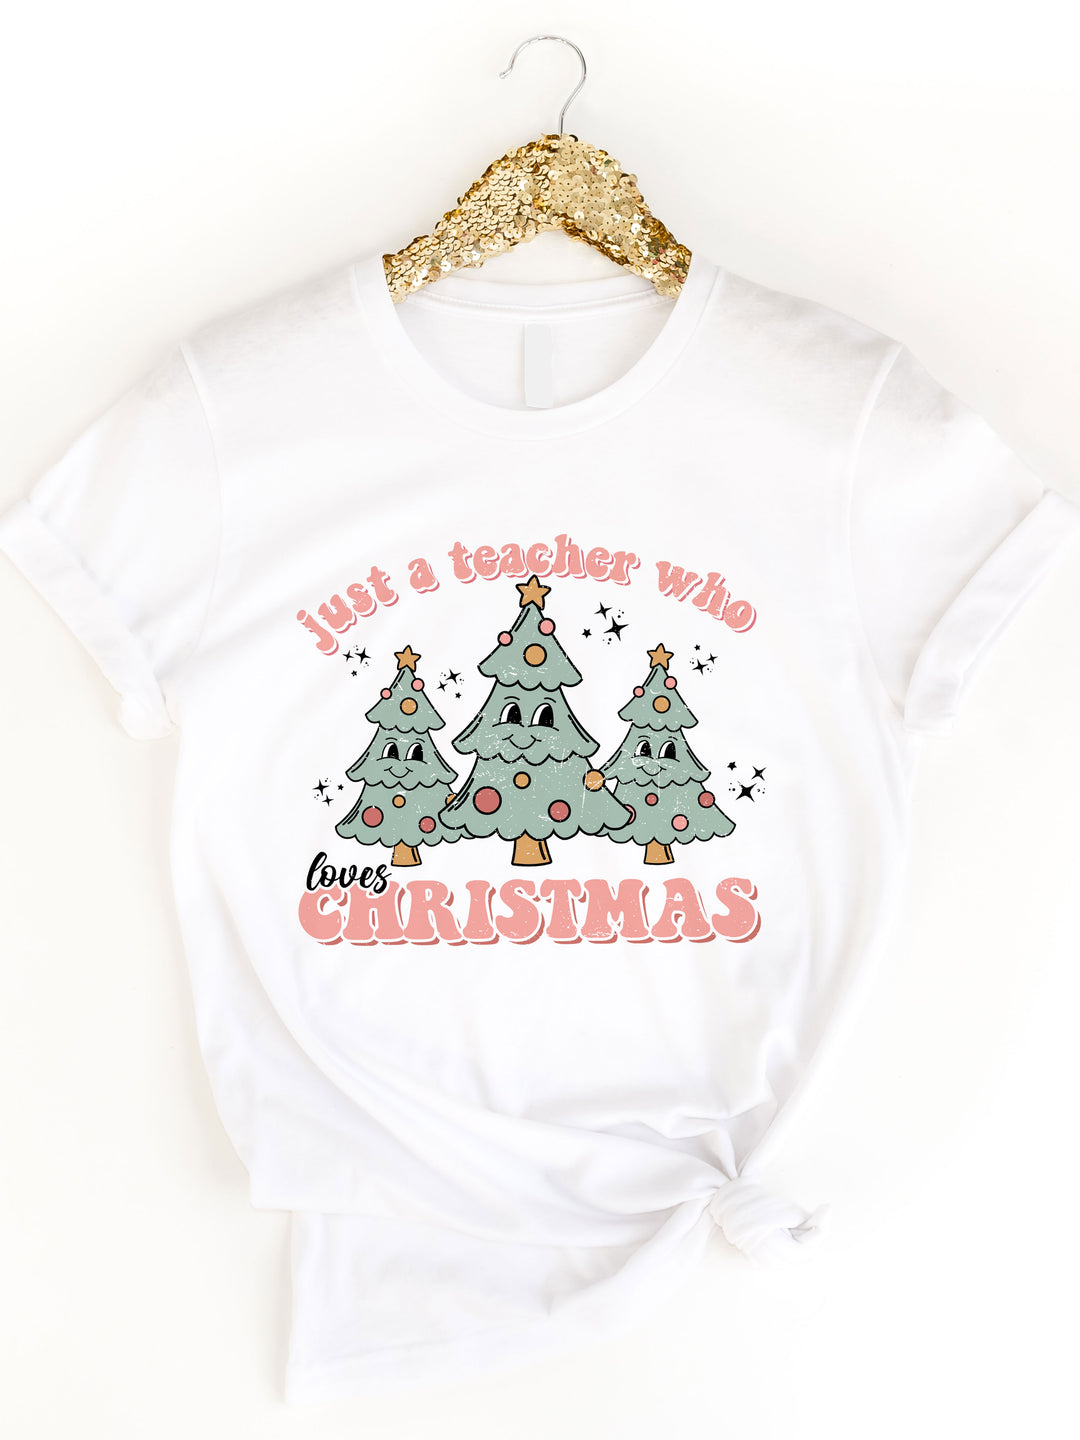 Just A Teacher Who Loves Christmas Graphic Tee